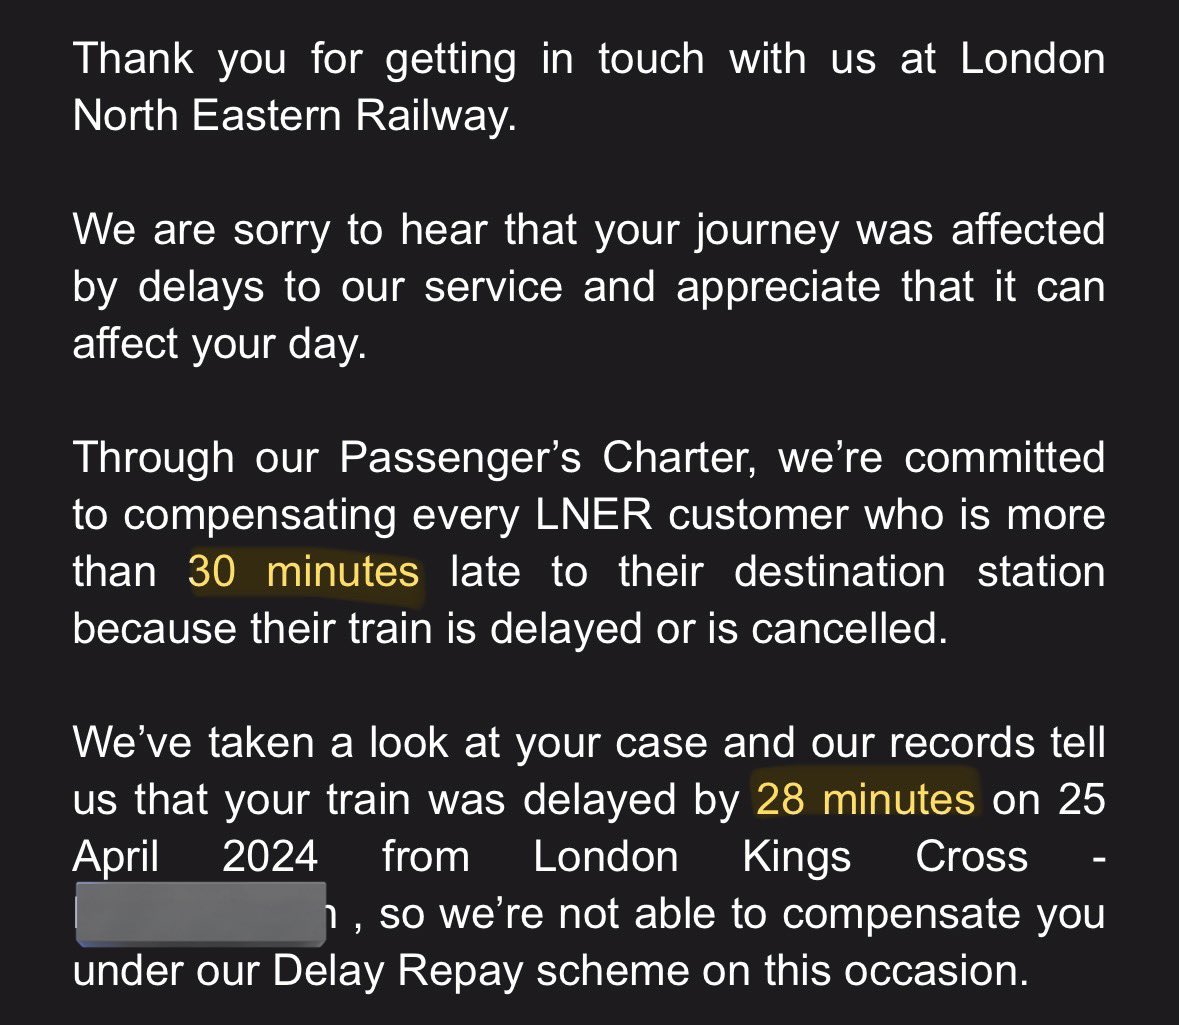 this is insane btw @LNER you’re a joke